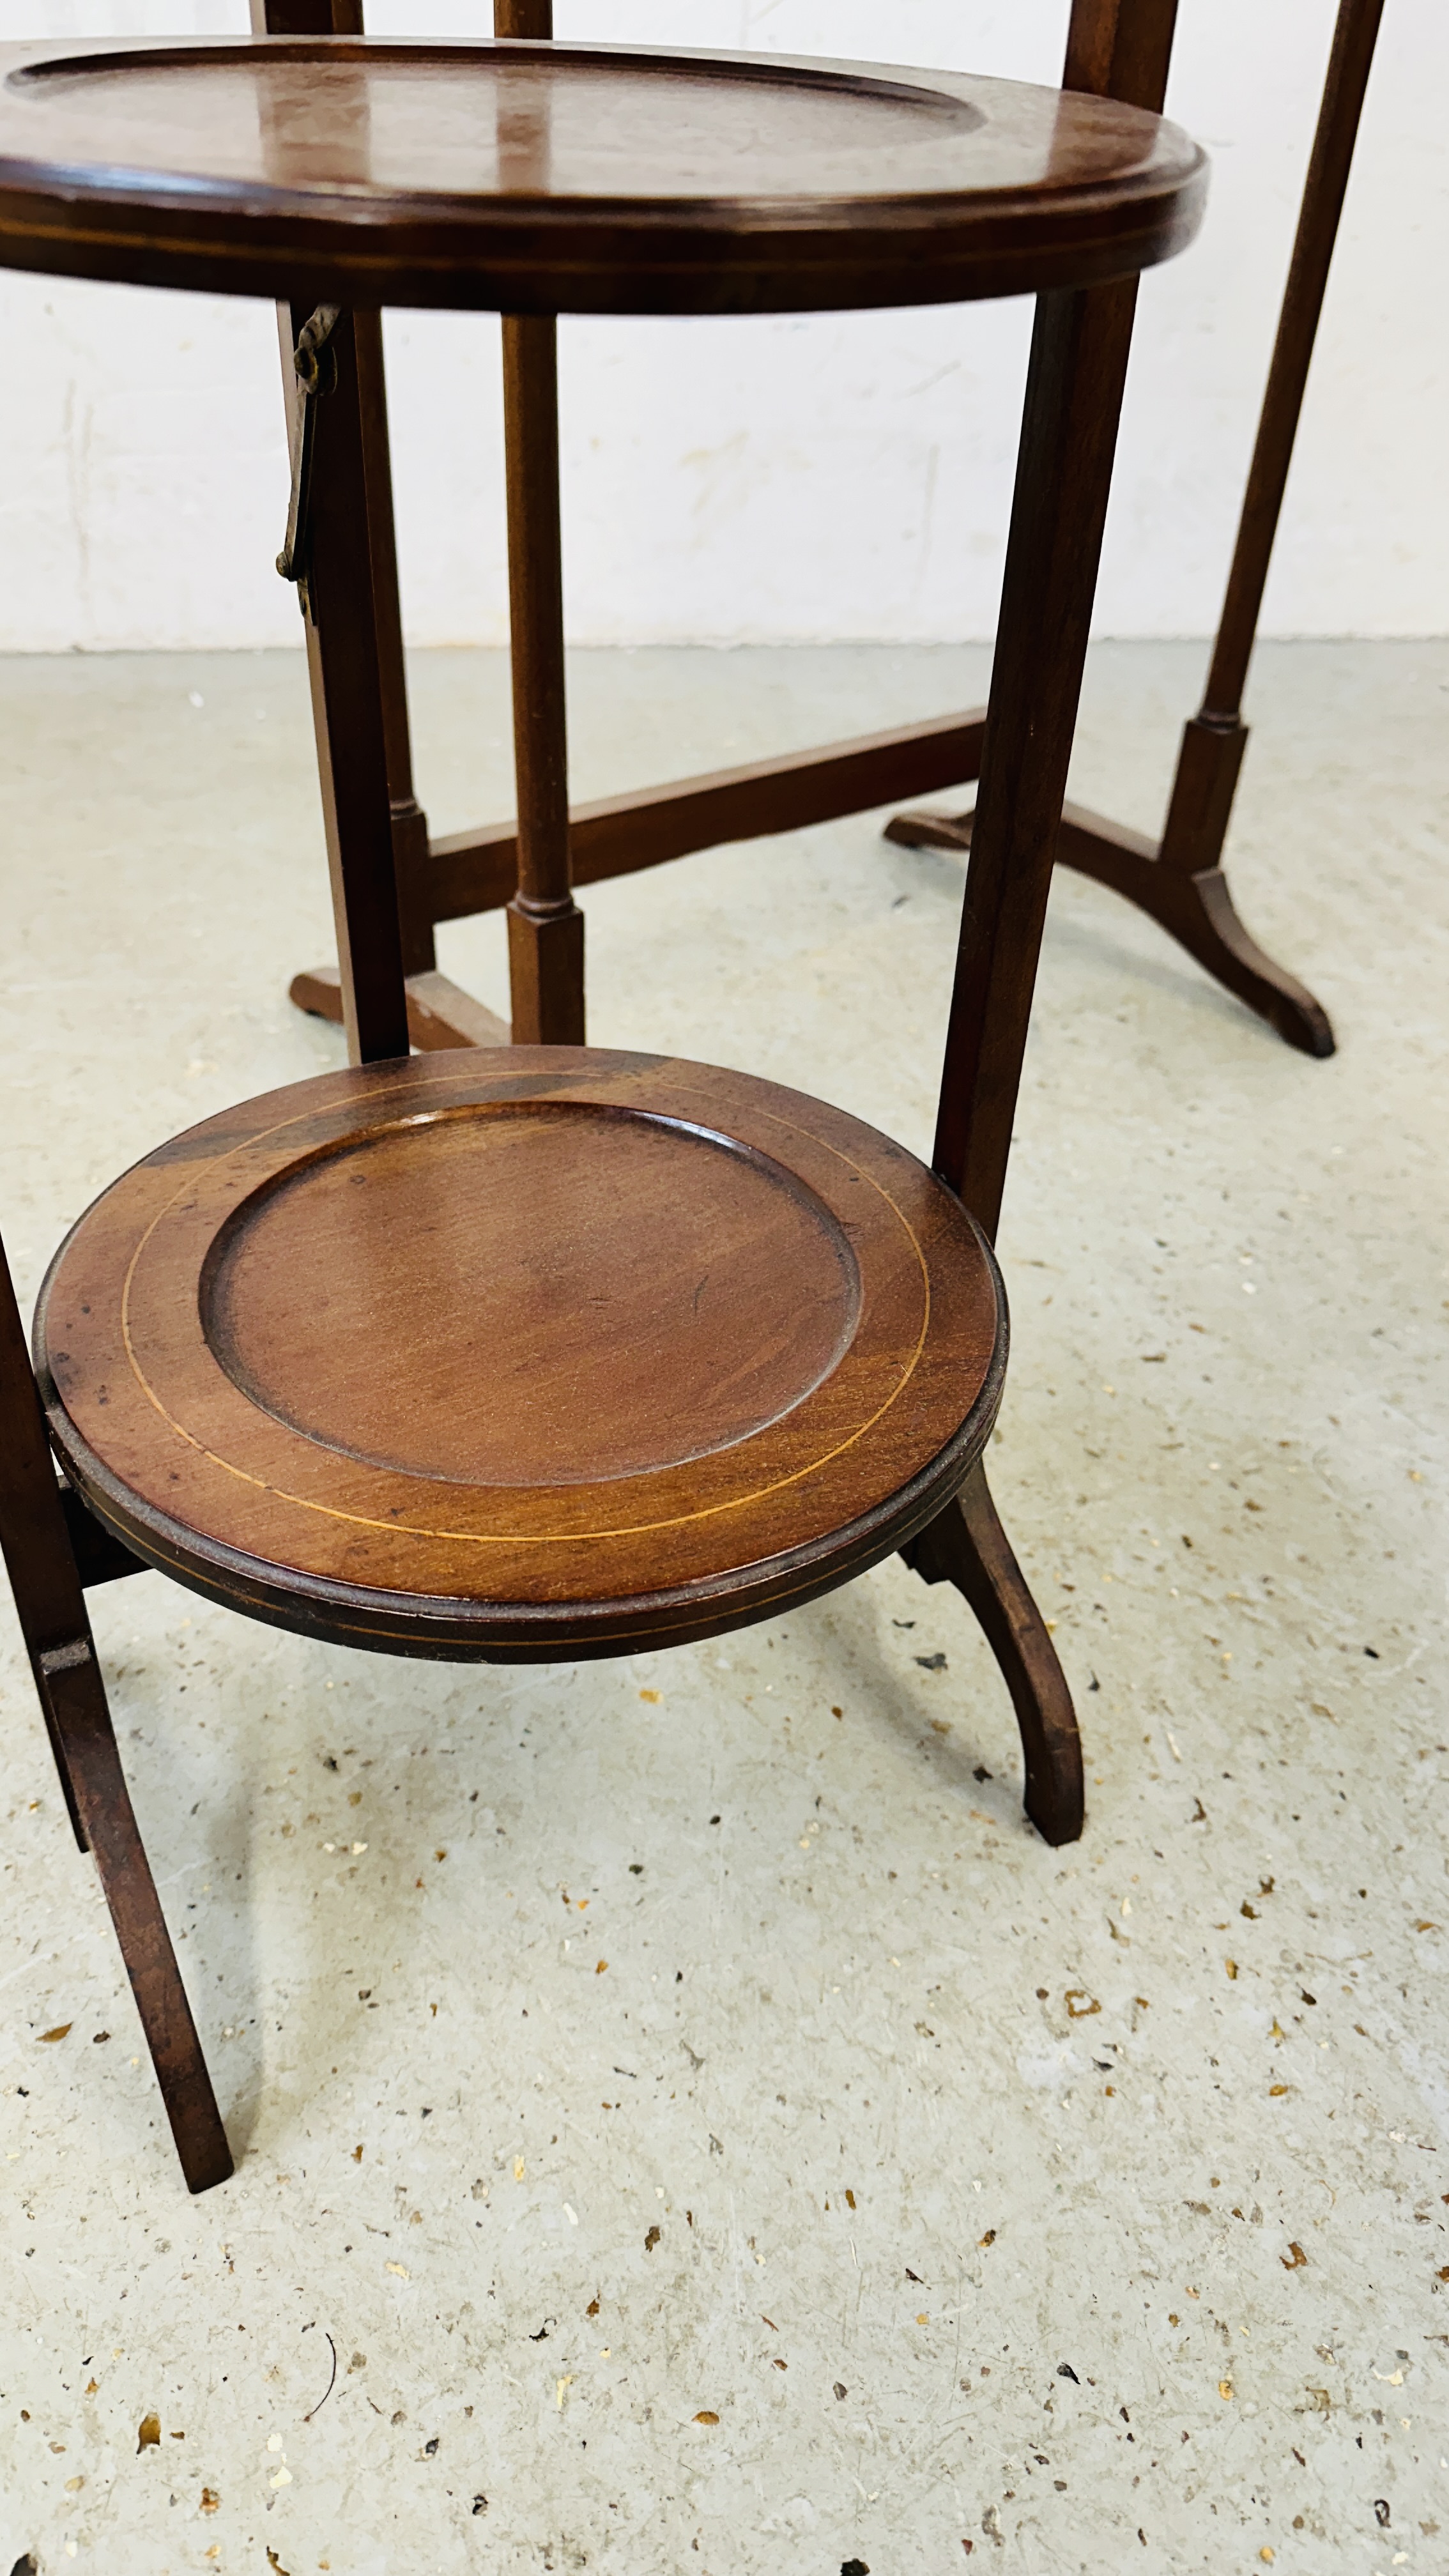 A FOLDING CAKE STAND ALONG WITH MAHOGNY OCCASIONAL TABLE, ONE OF A QUATTETO SET. - Image 5 of 10